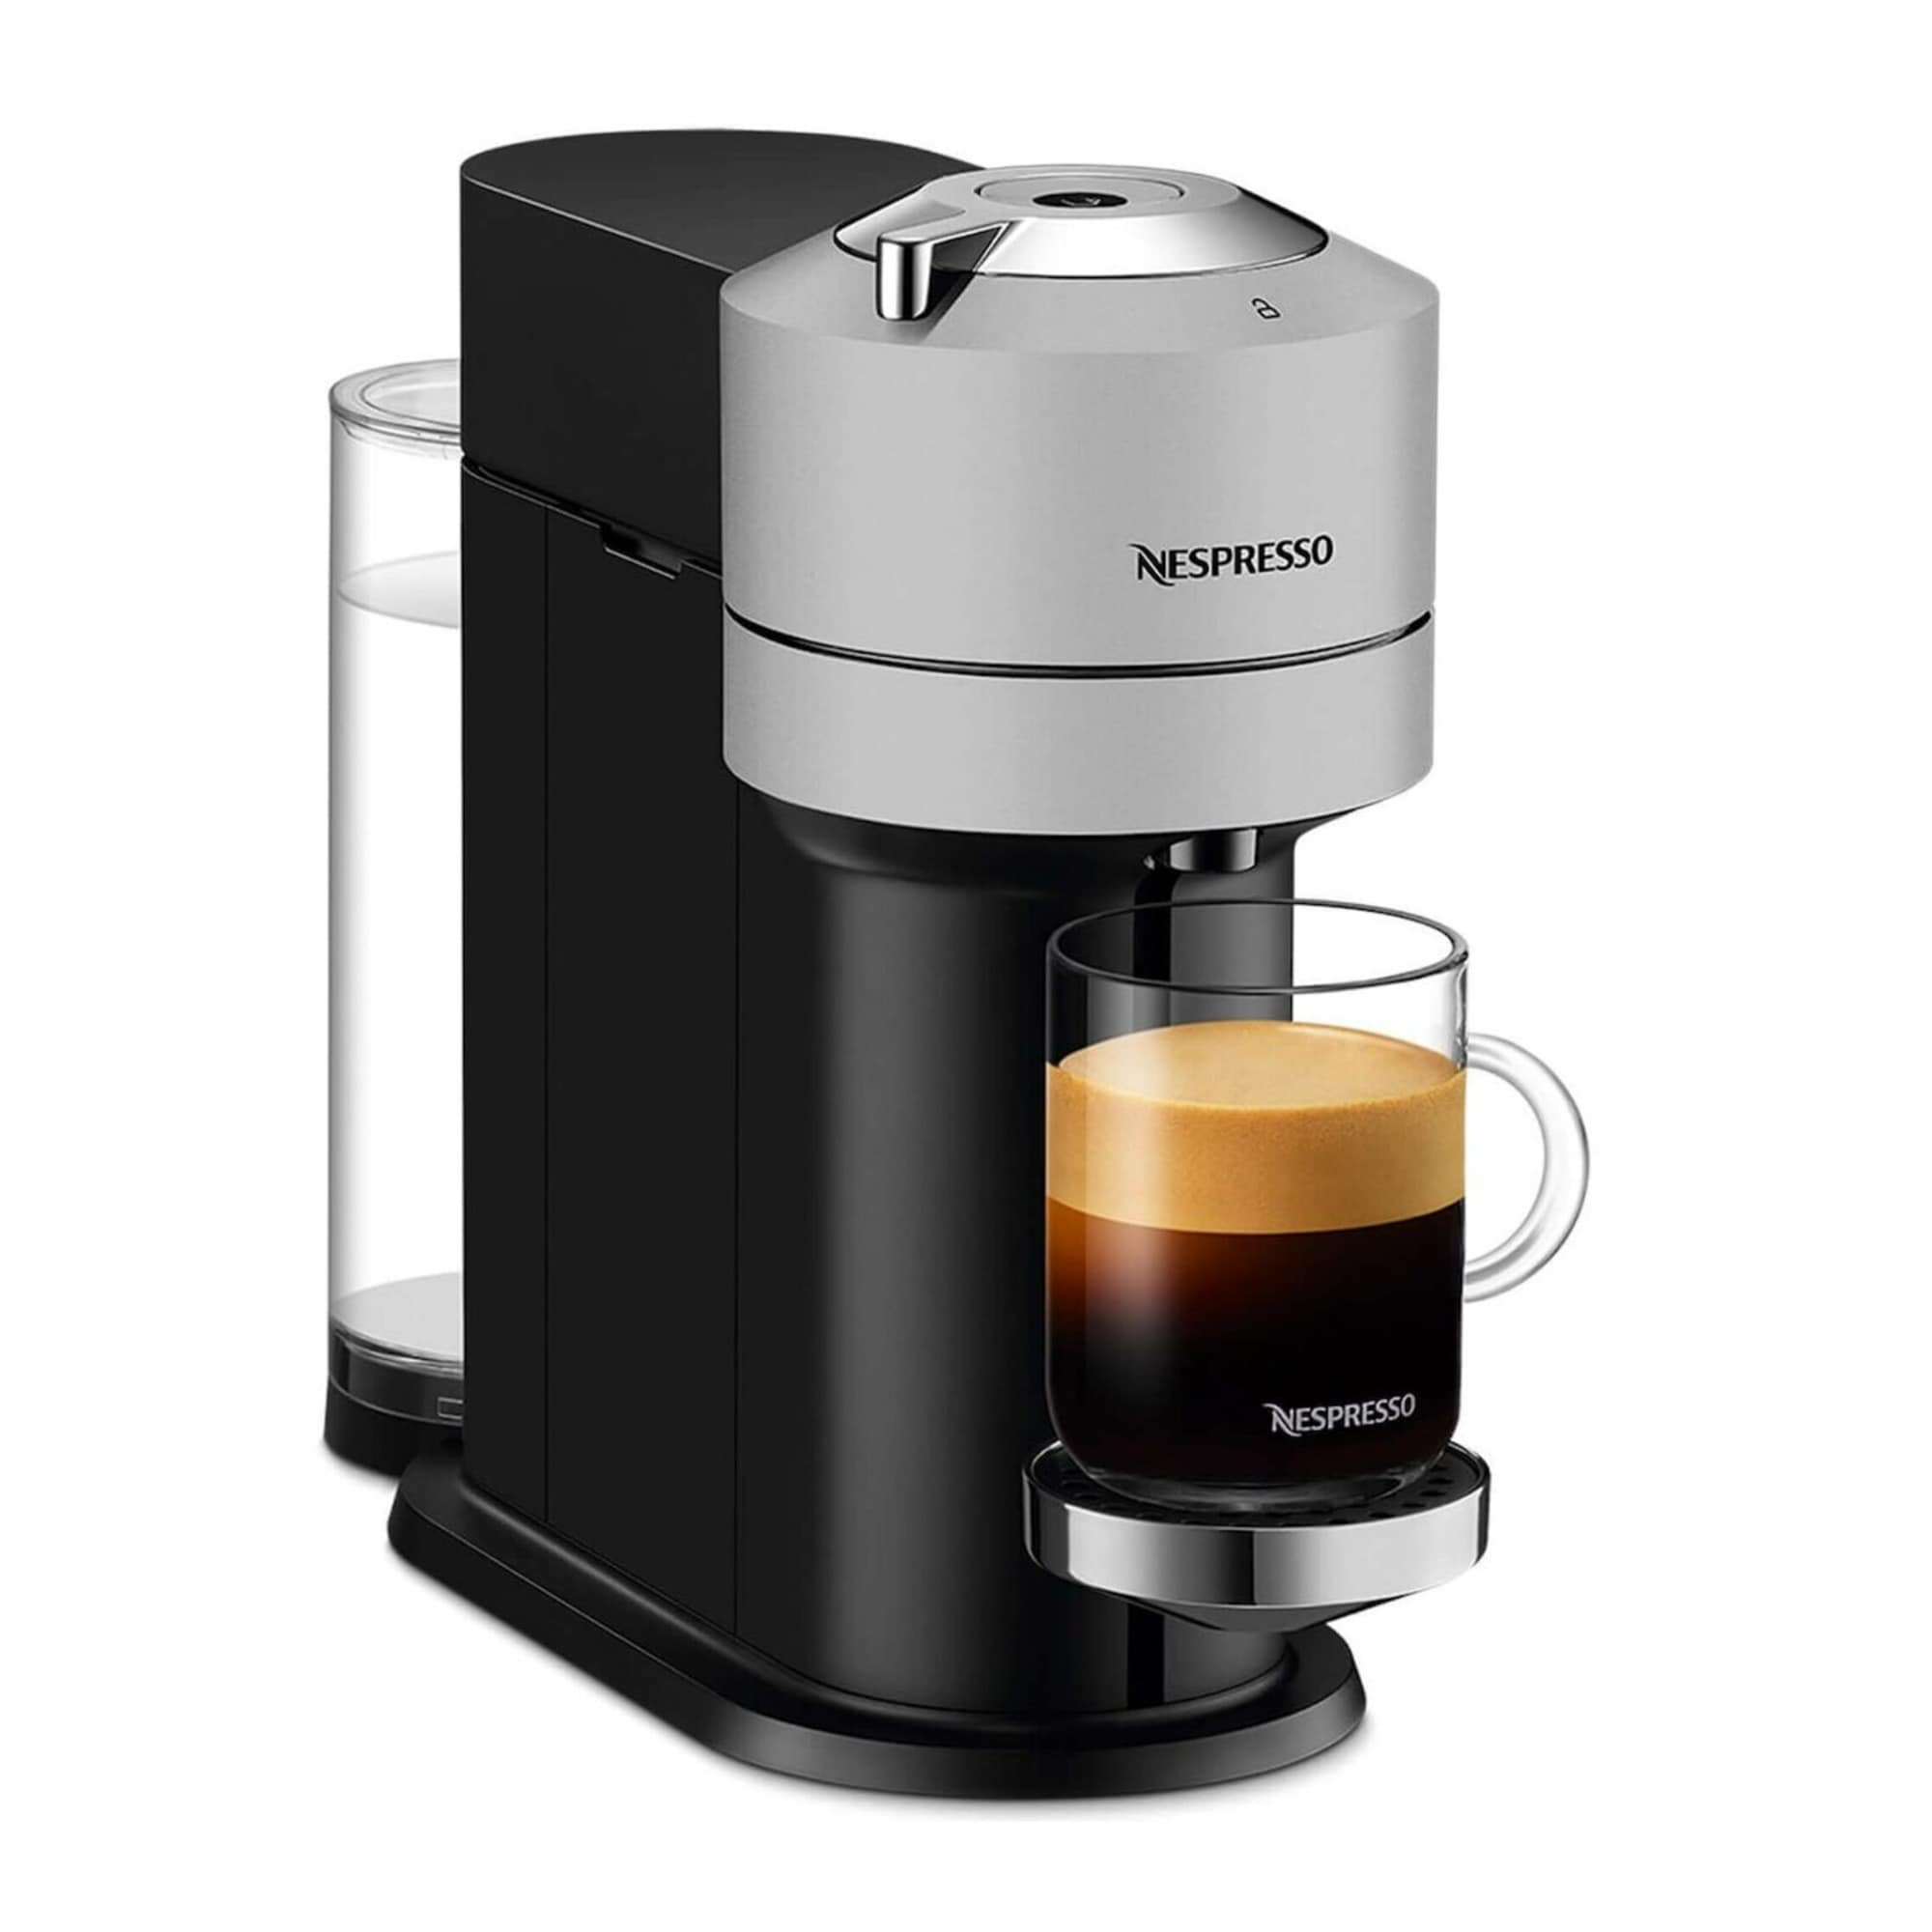 https://ak1.ostkcdn.com/images/products/is/images/direct/3f02996b4e5a4f6b360a66c3c1156222f1375f6c/Nespresso-Vertuo-Next-Deluxe-Compact-Coffee%2C-Espresso-Machine-%28Silver%29.jpg